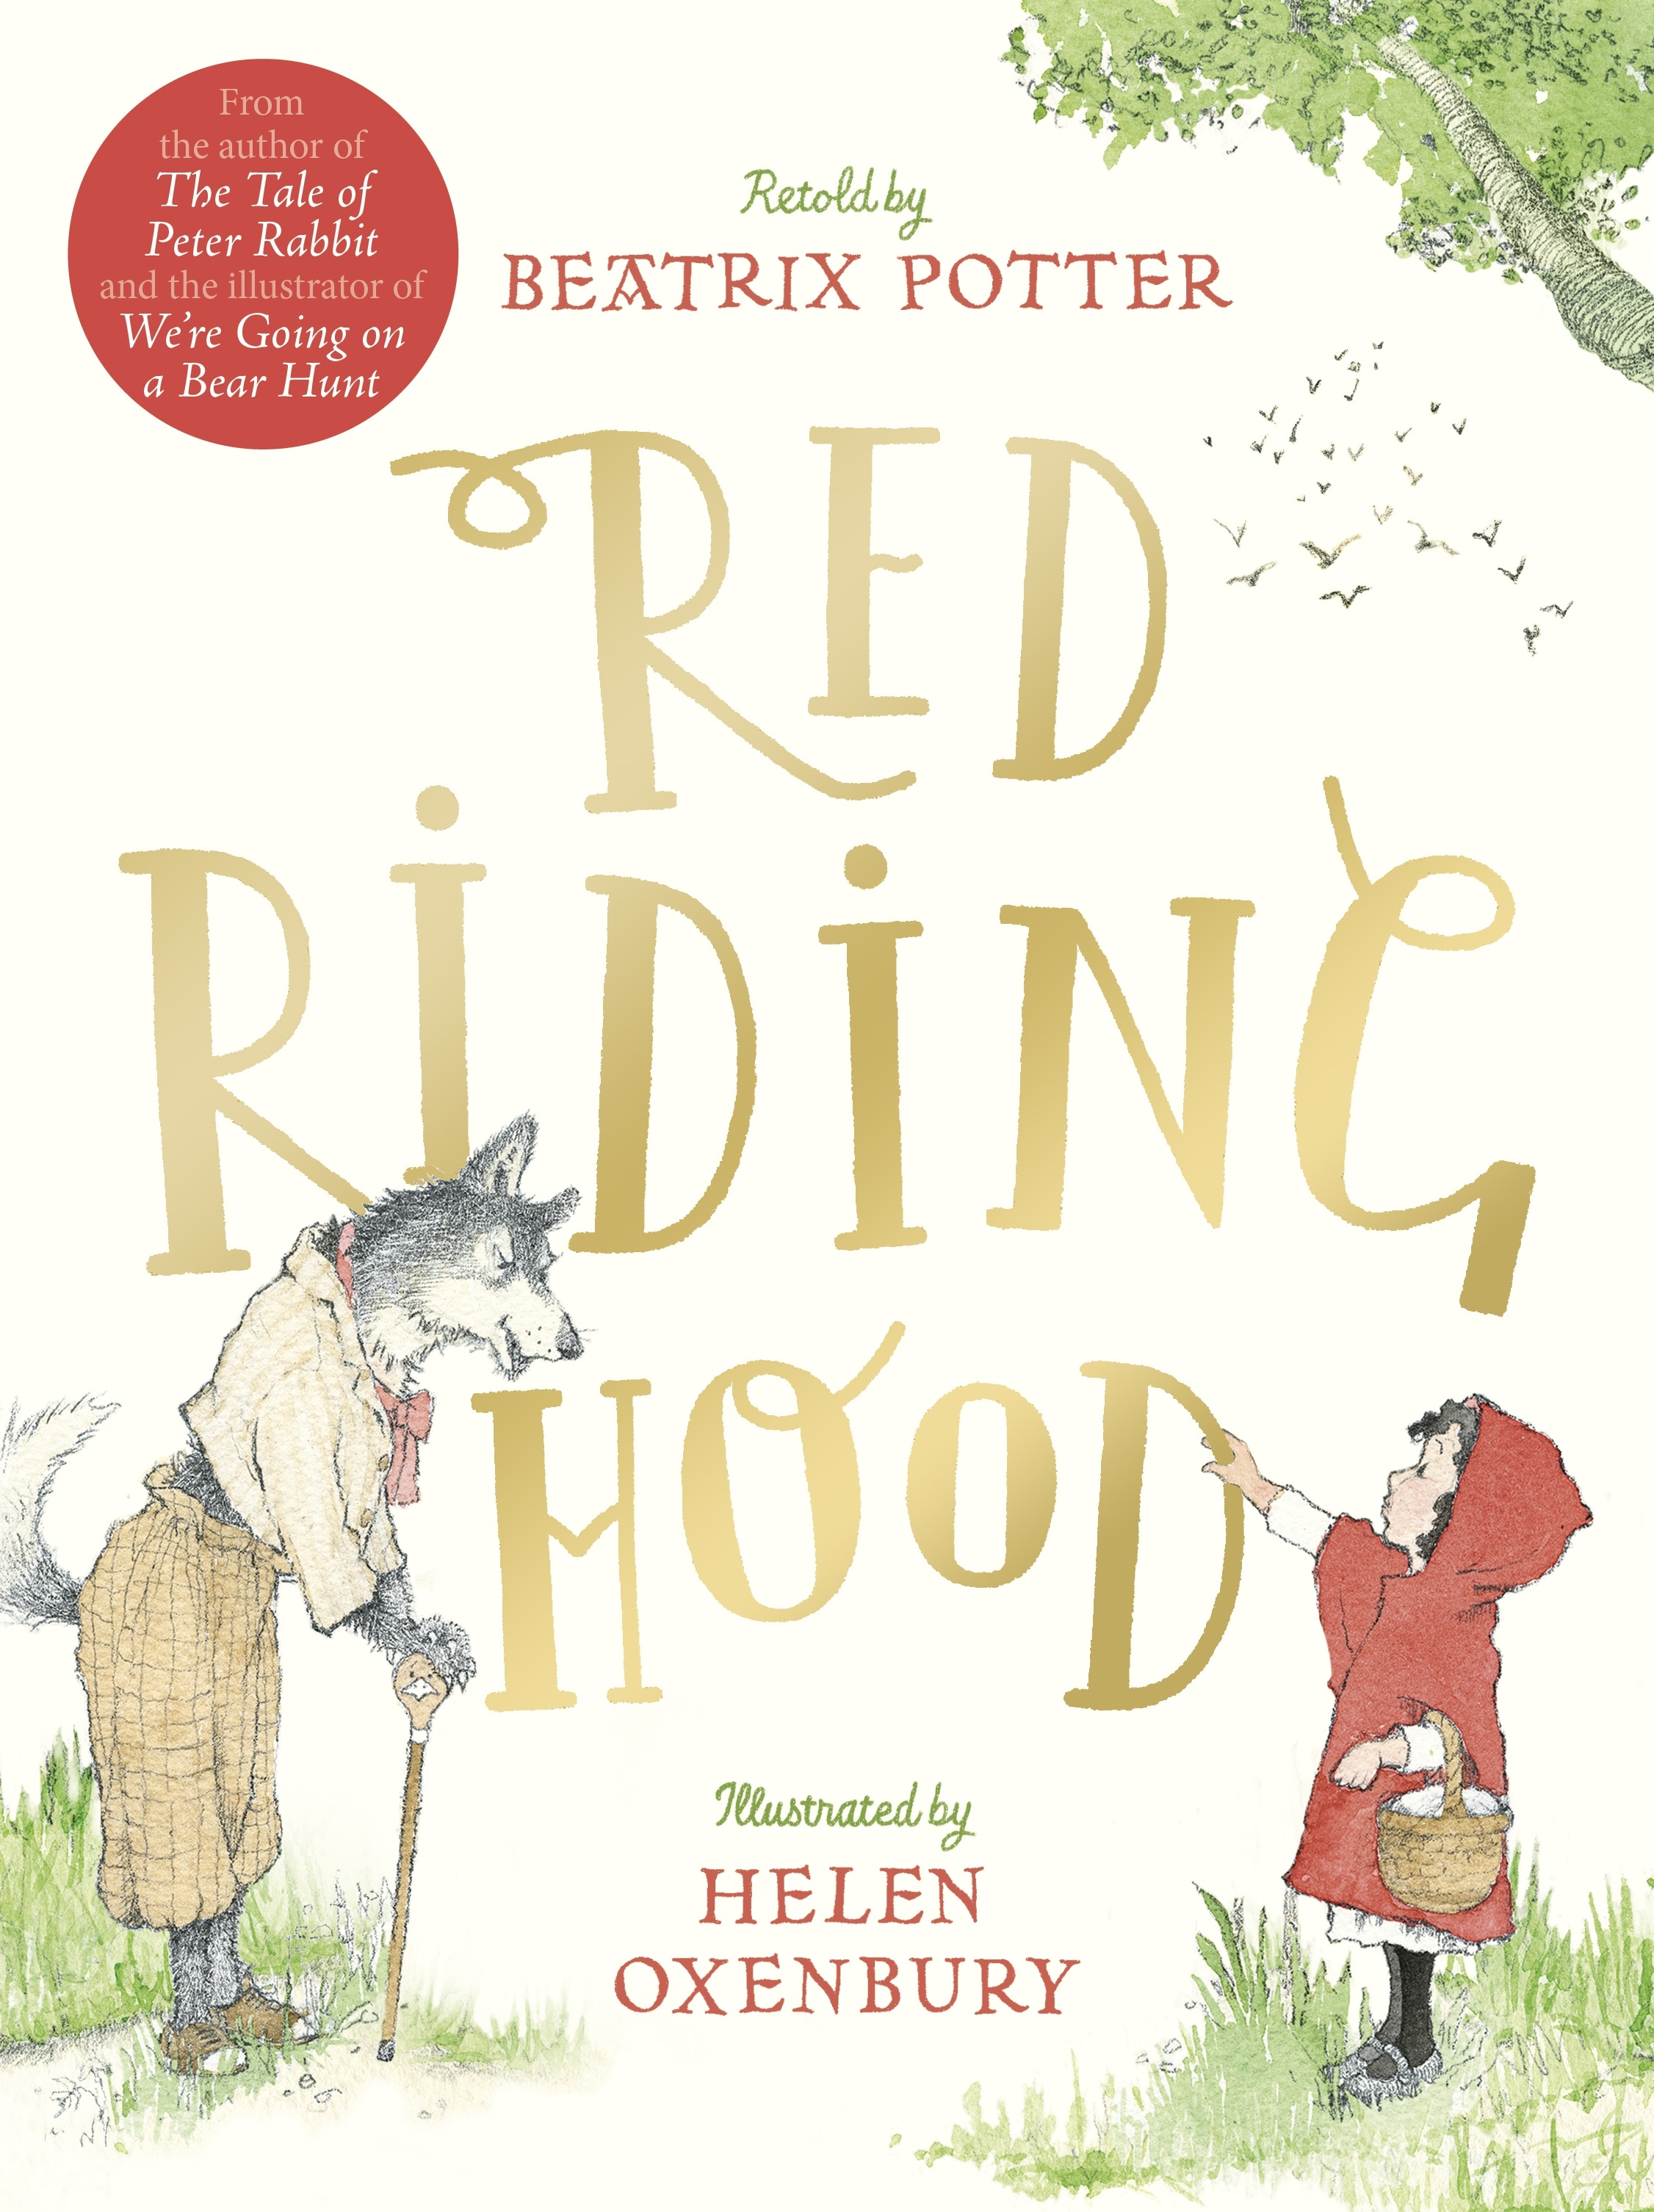 Book “Red Riding Hood” by Beatrix Potter — April 1, 2021